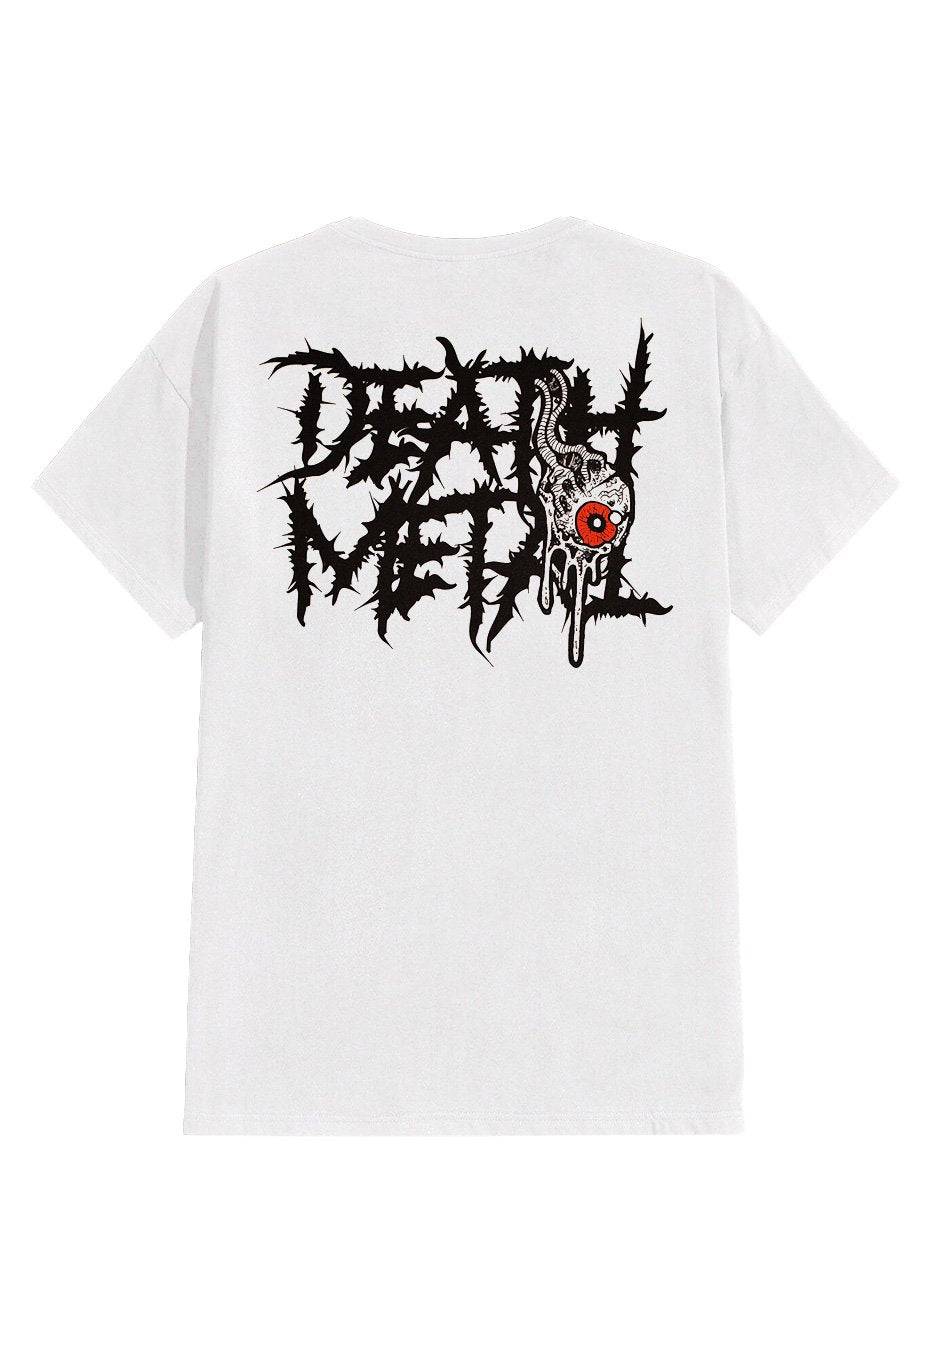 Ingested - In The Eye Of Death White - T-Shirt